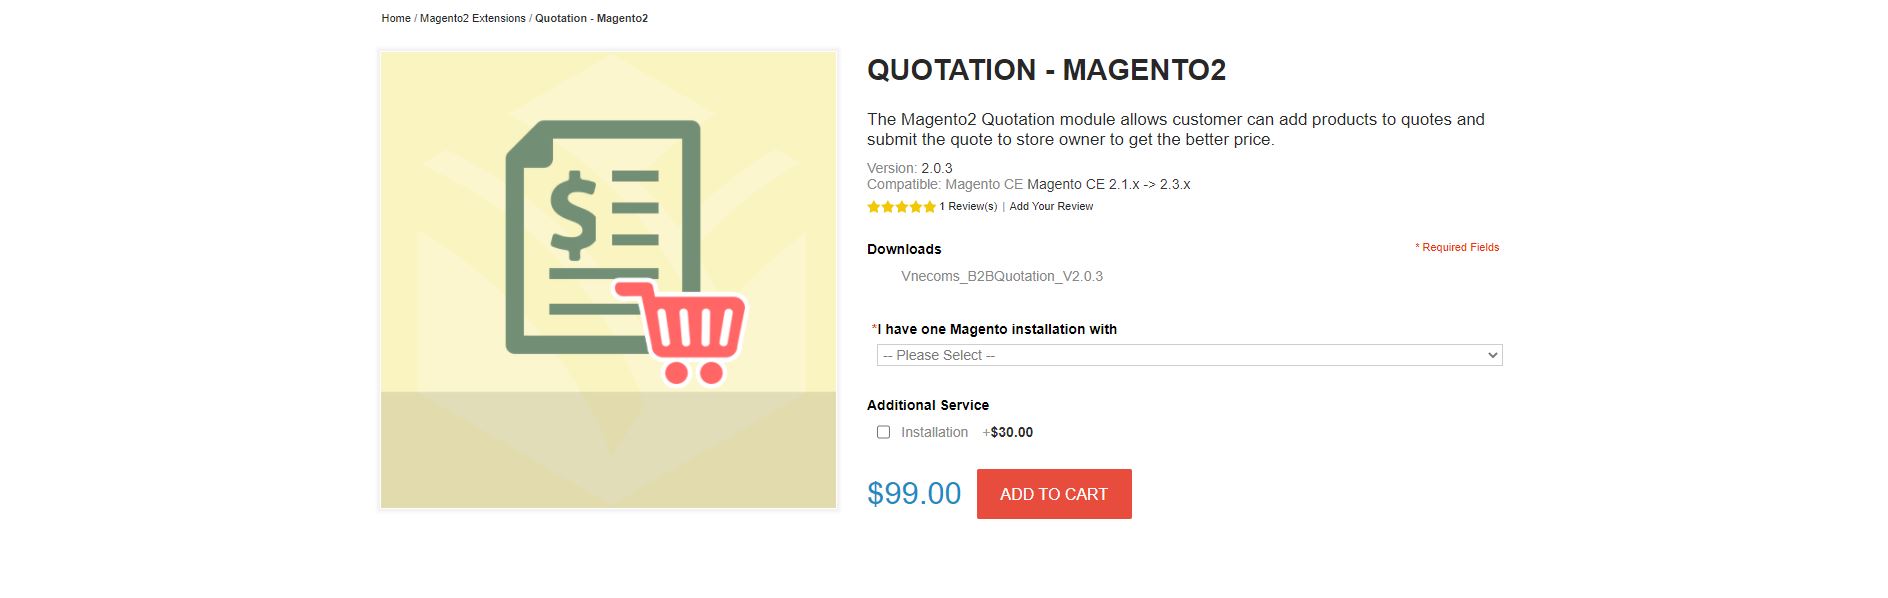 Magento quote extension